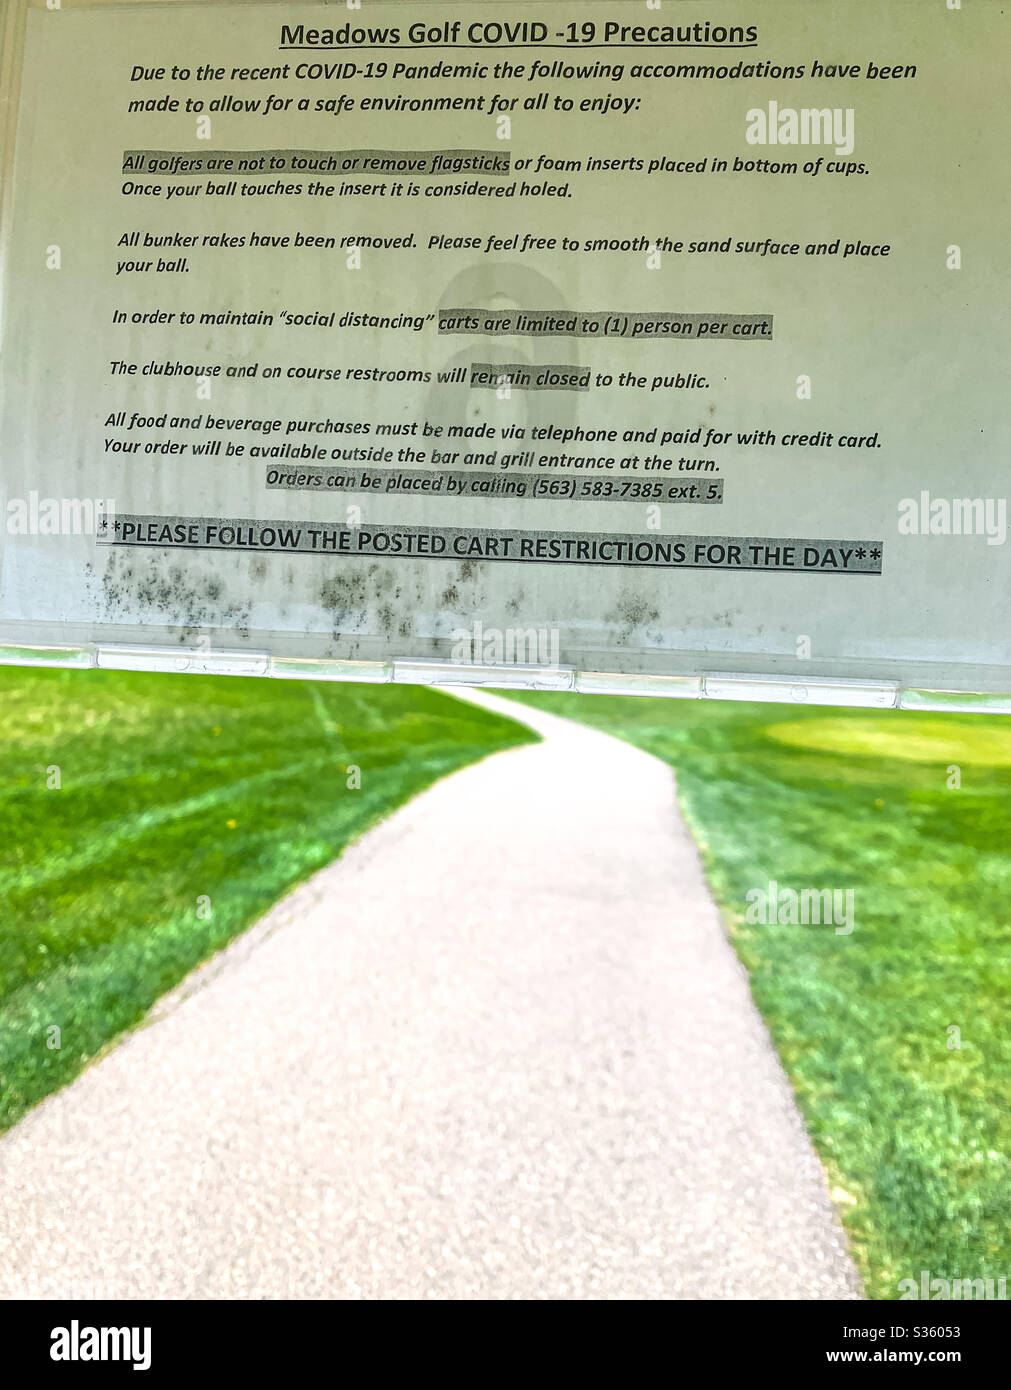 DUBUQUE, IOWA, May 3, 2020–Closeup photo of signage posted in golf cart regarding protocol in place during Covid-19 pandemic at a local golf course on beautiful spring day. Stock Photo